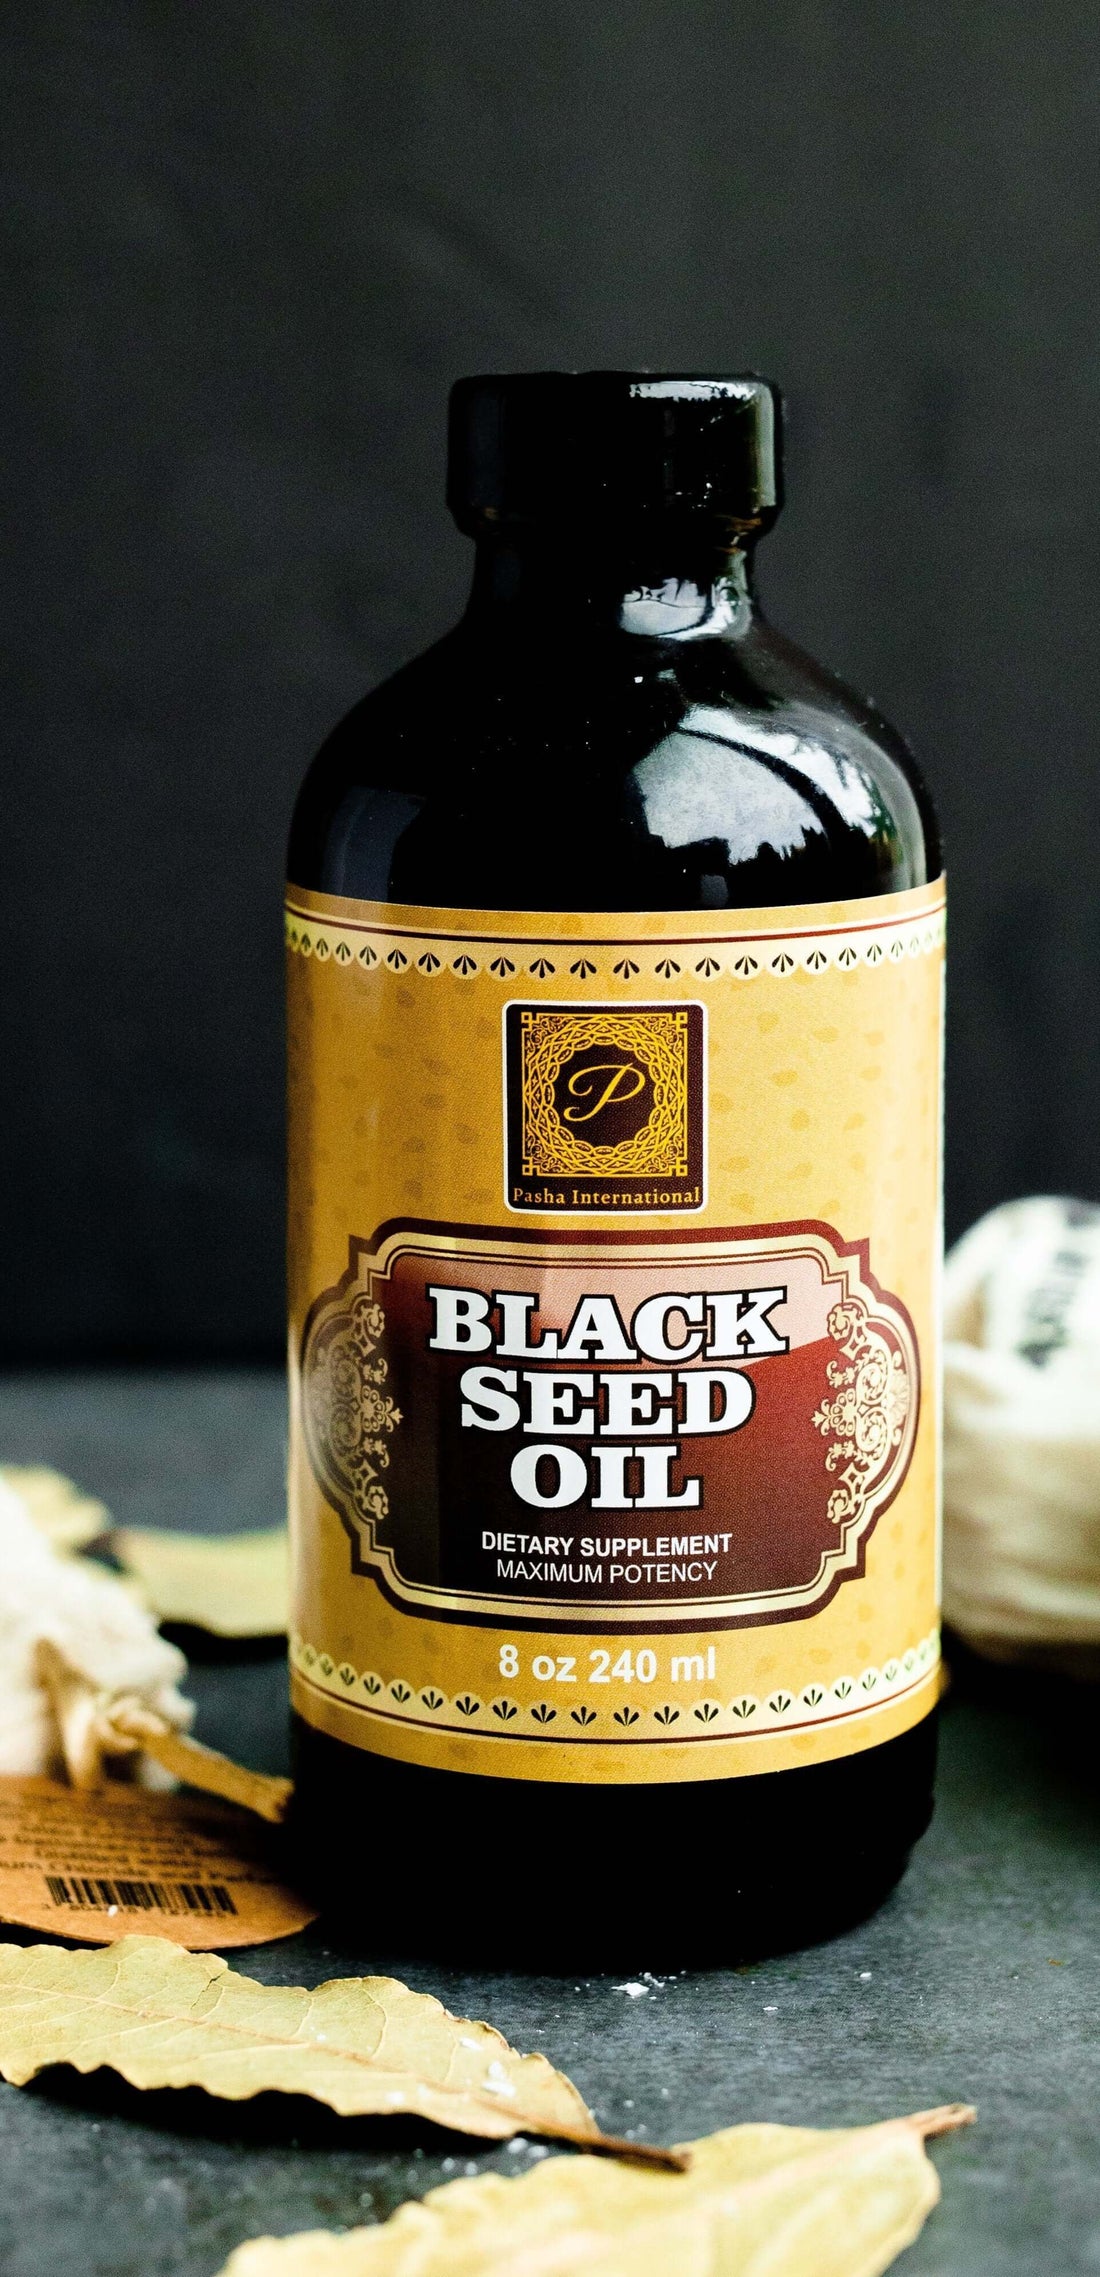 What is Black Seed Oil?